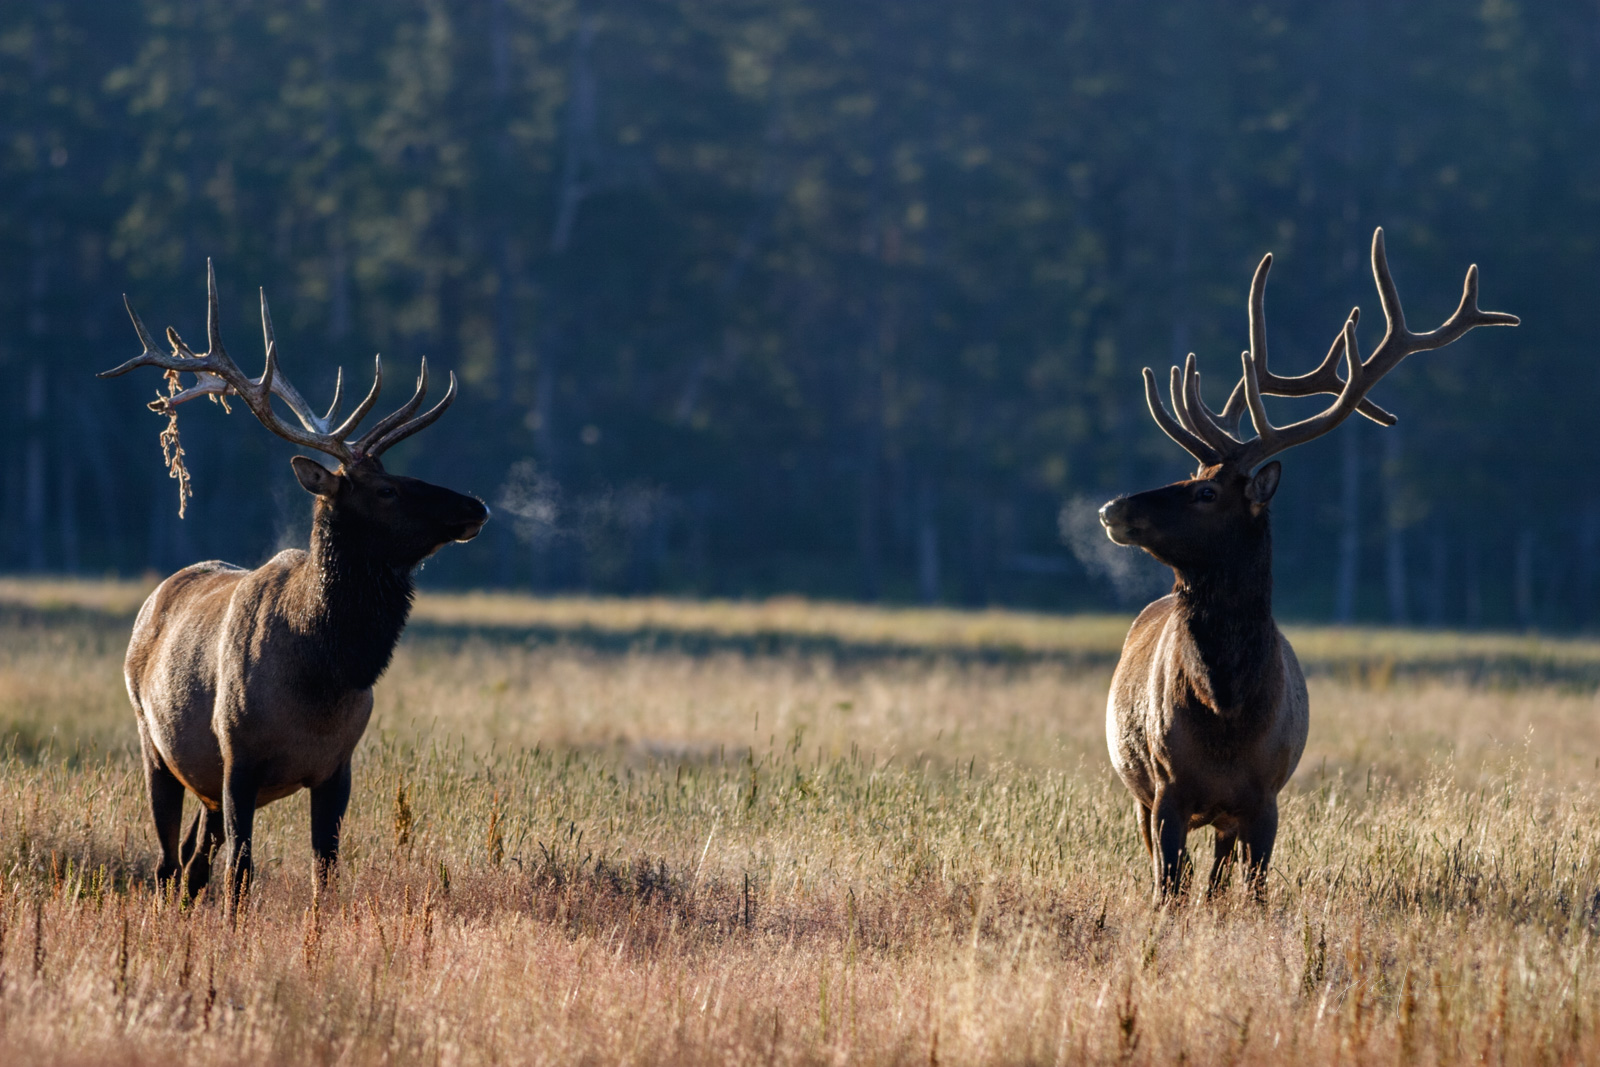 Two Bull Elk facing off in a challange